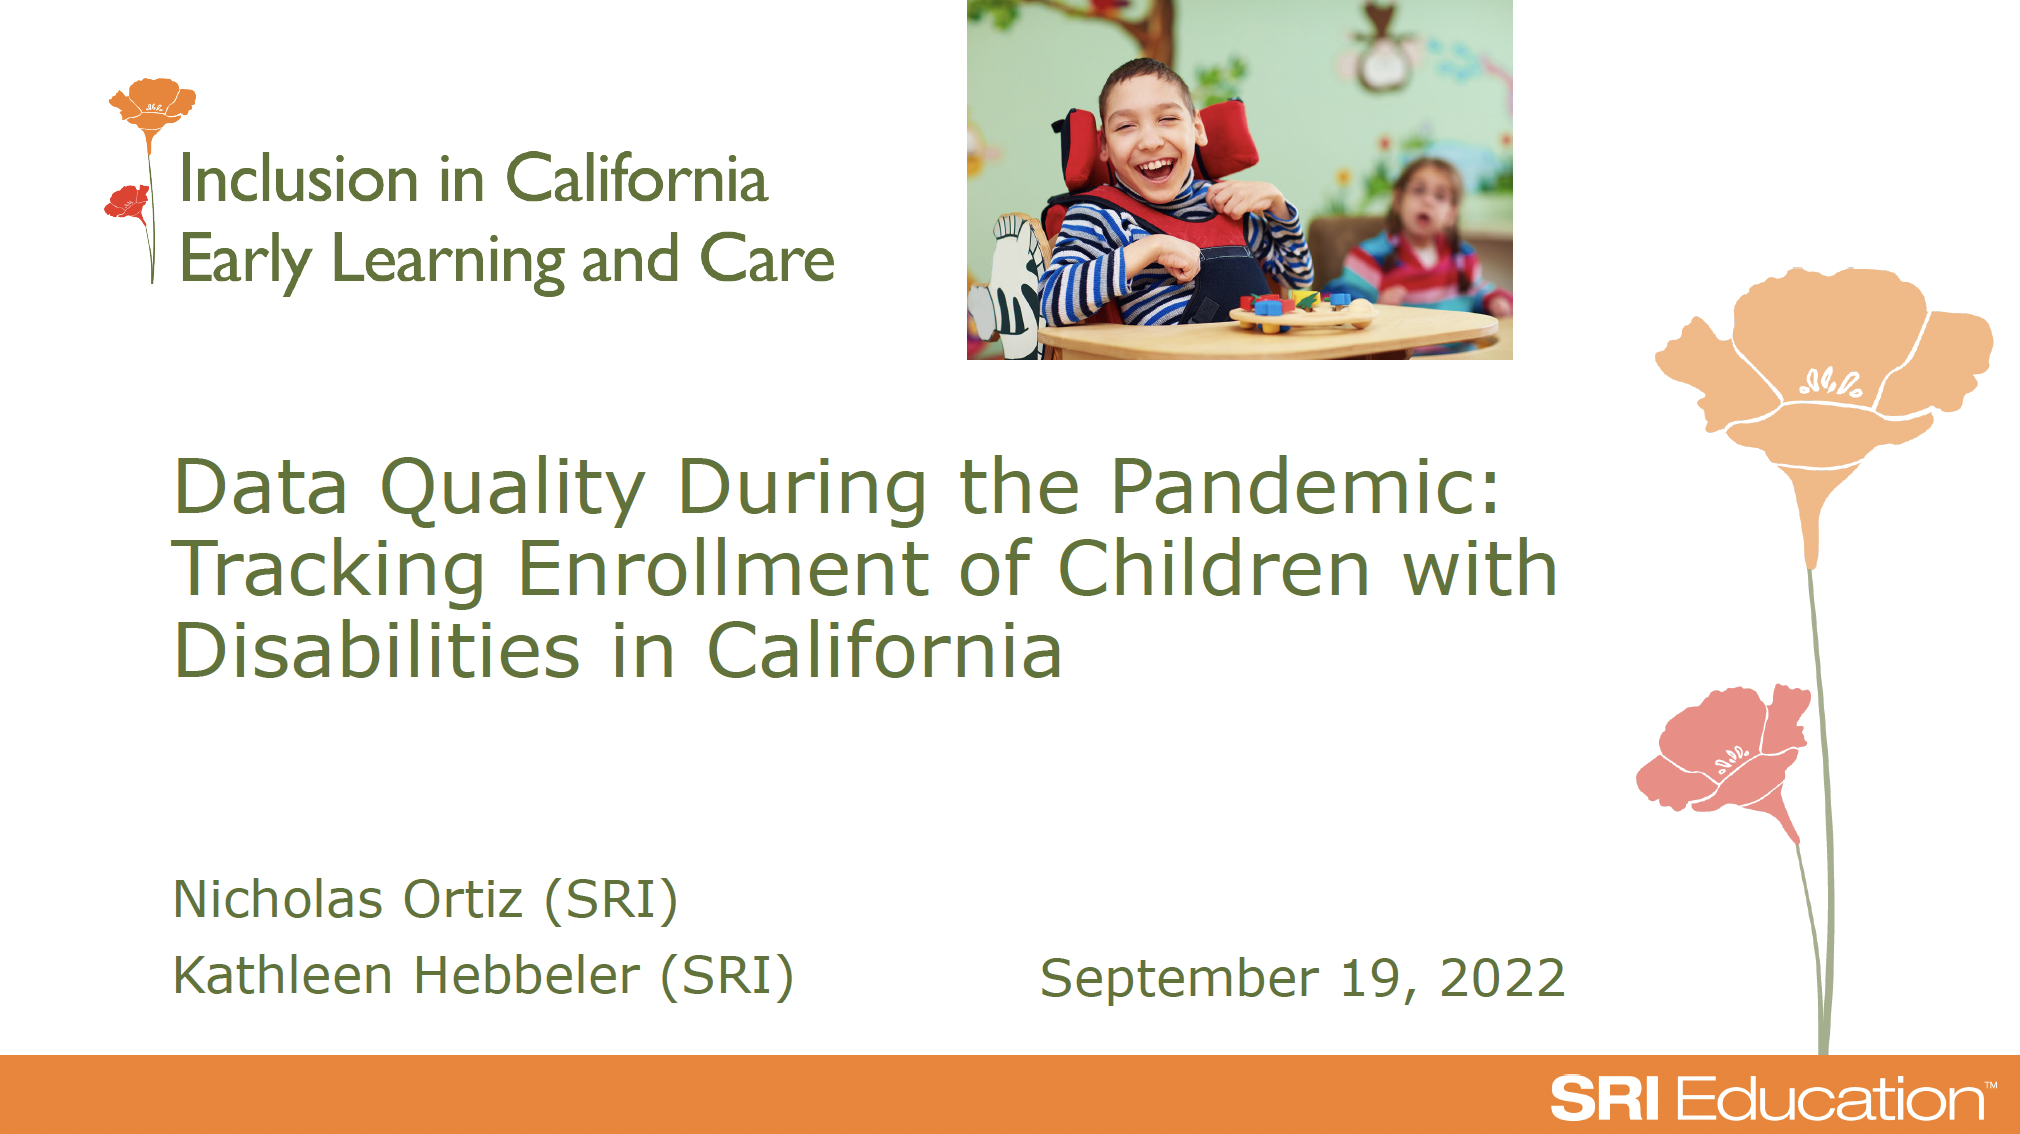 Data Quality During the Pandemic: Tracking Enrollment of Children with Disabilities in California